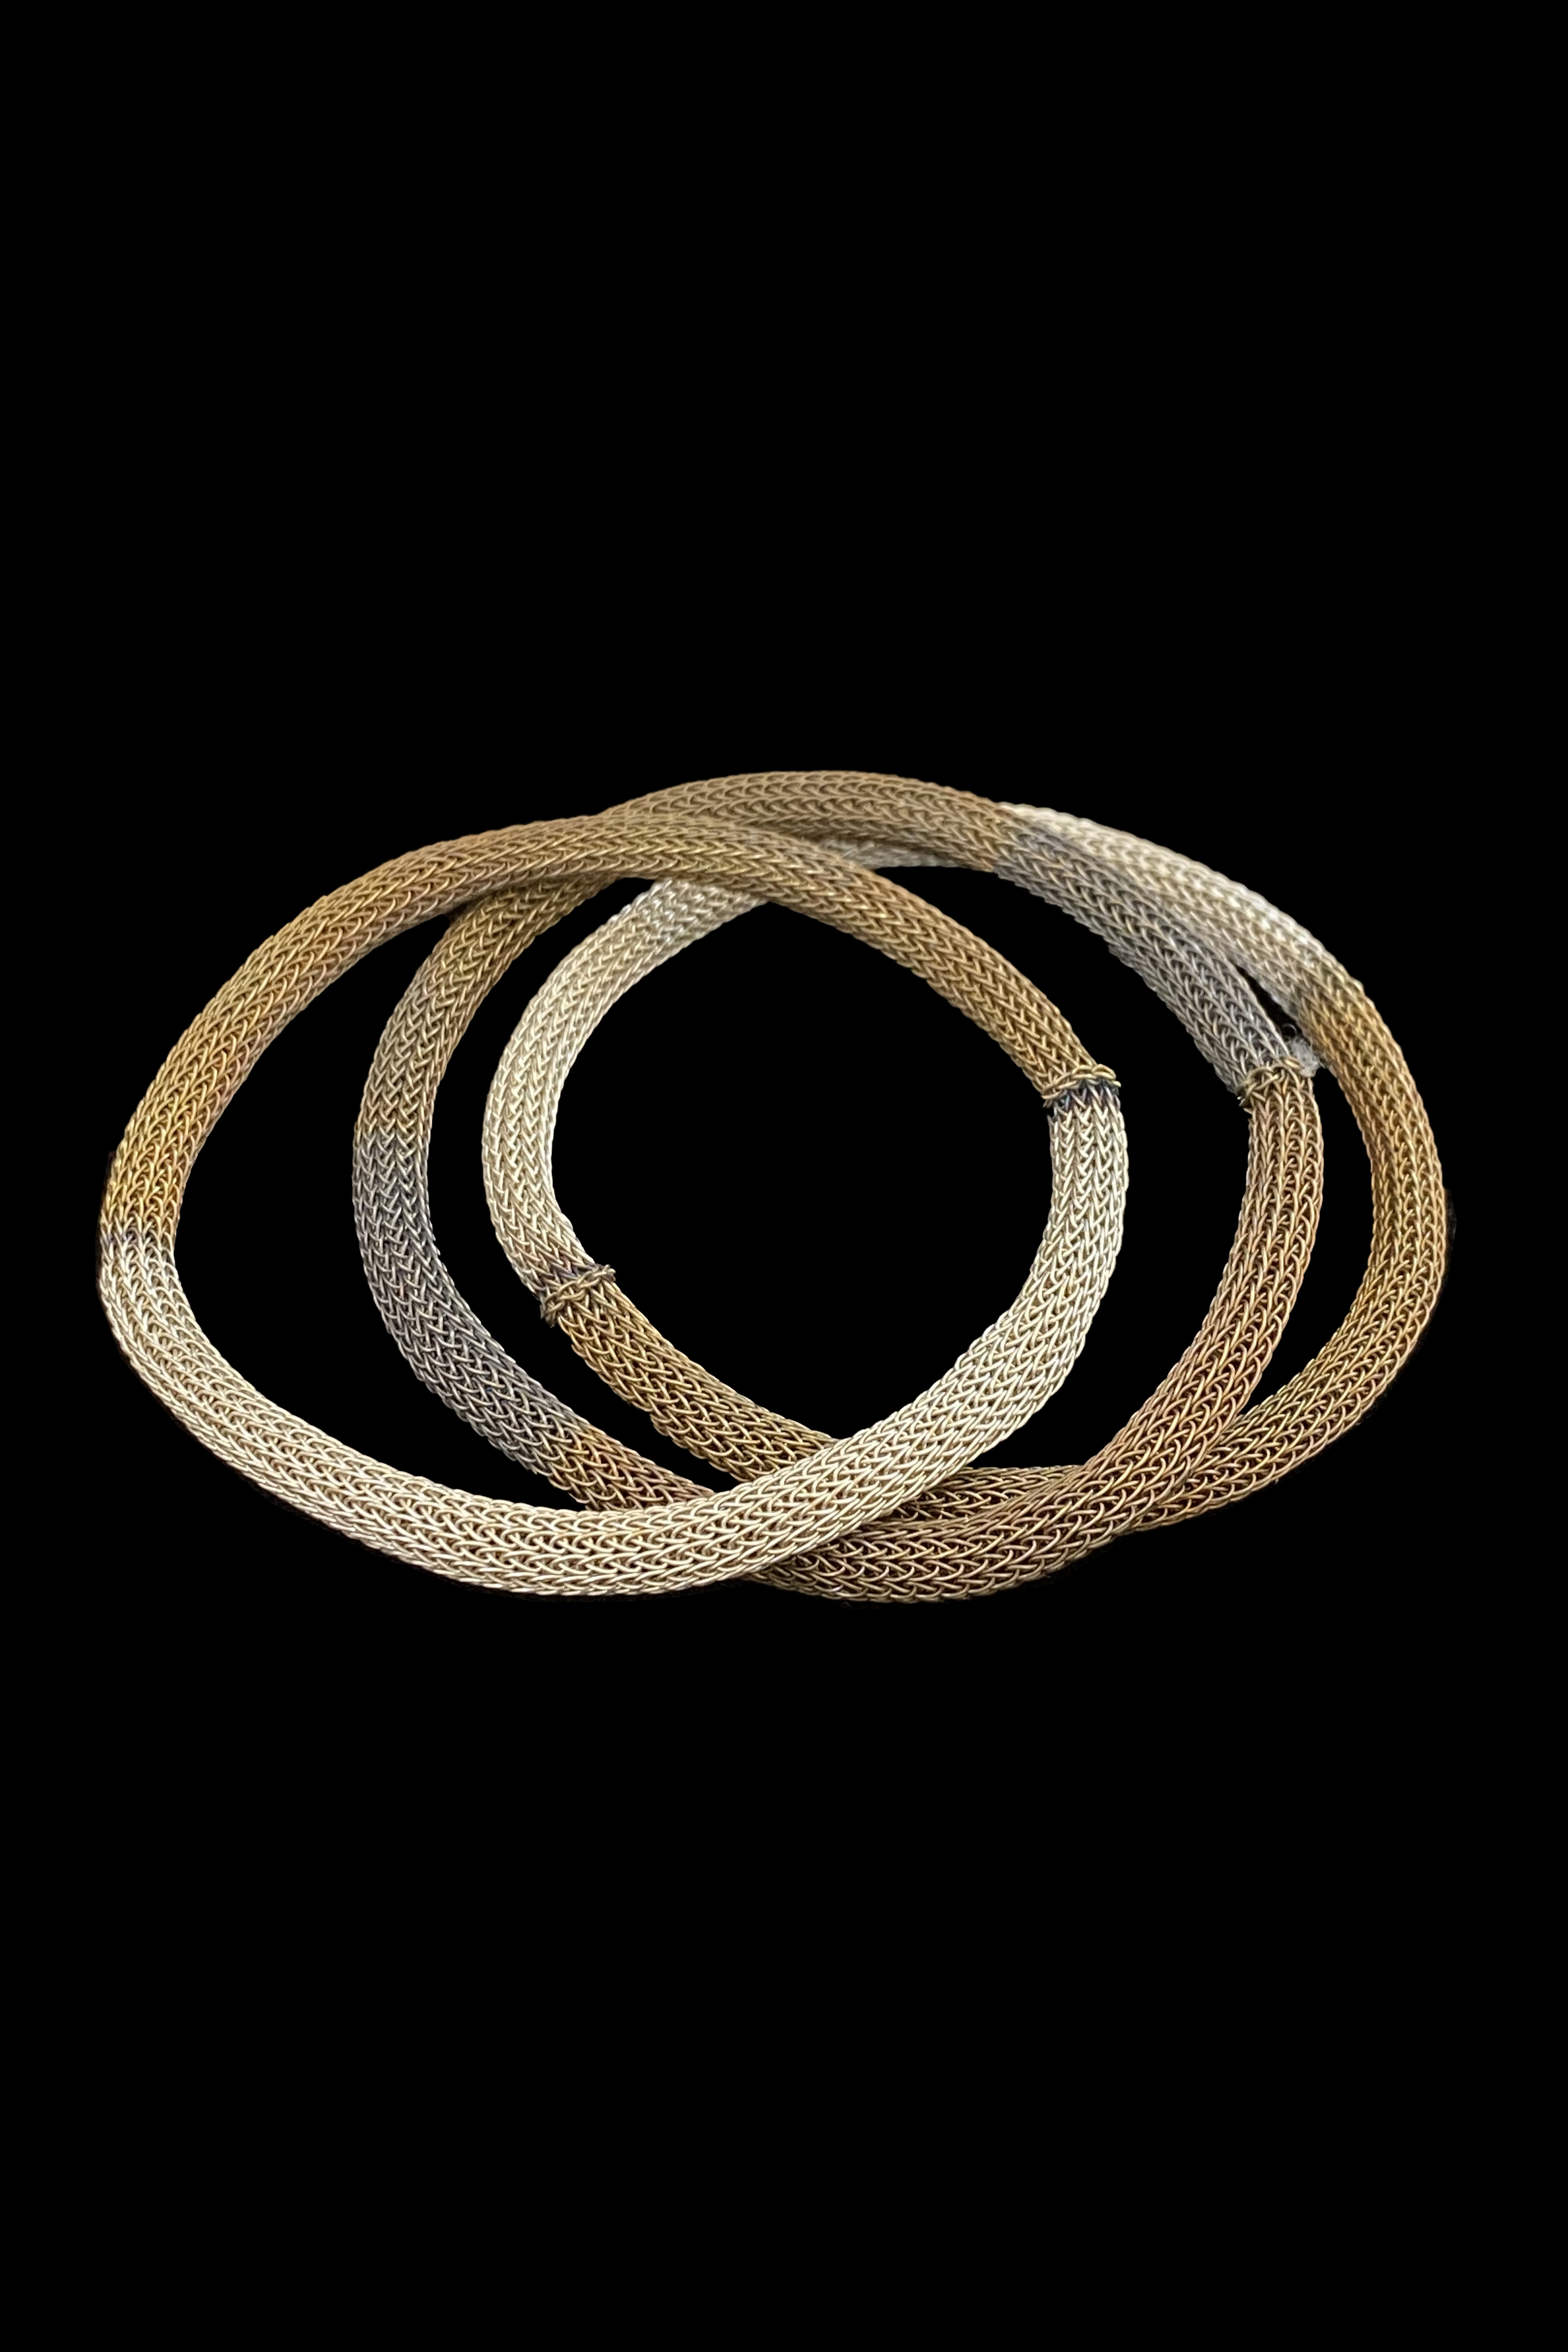 Thin Woven Bracelets -  Silver, and Plated 18k Gold  - Set of 3 